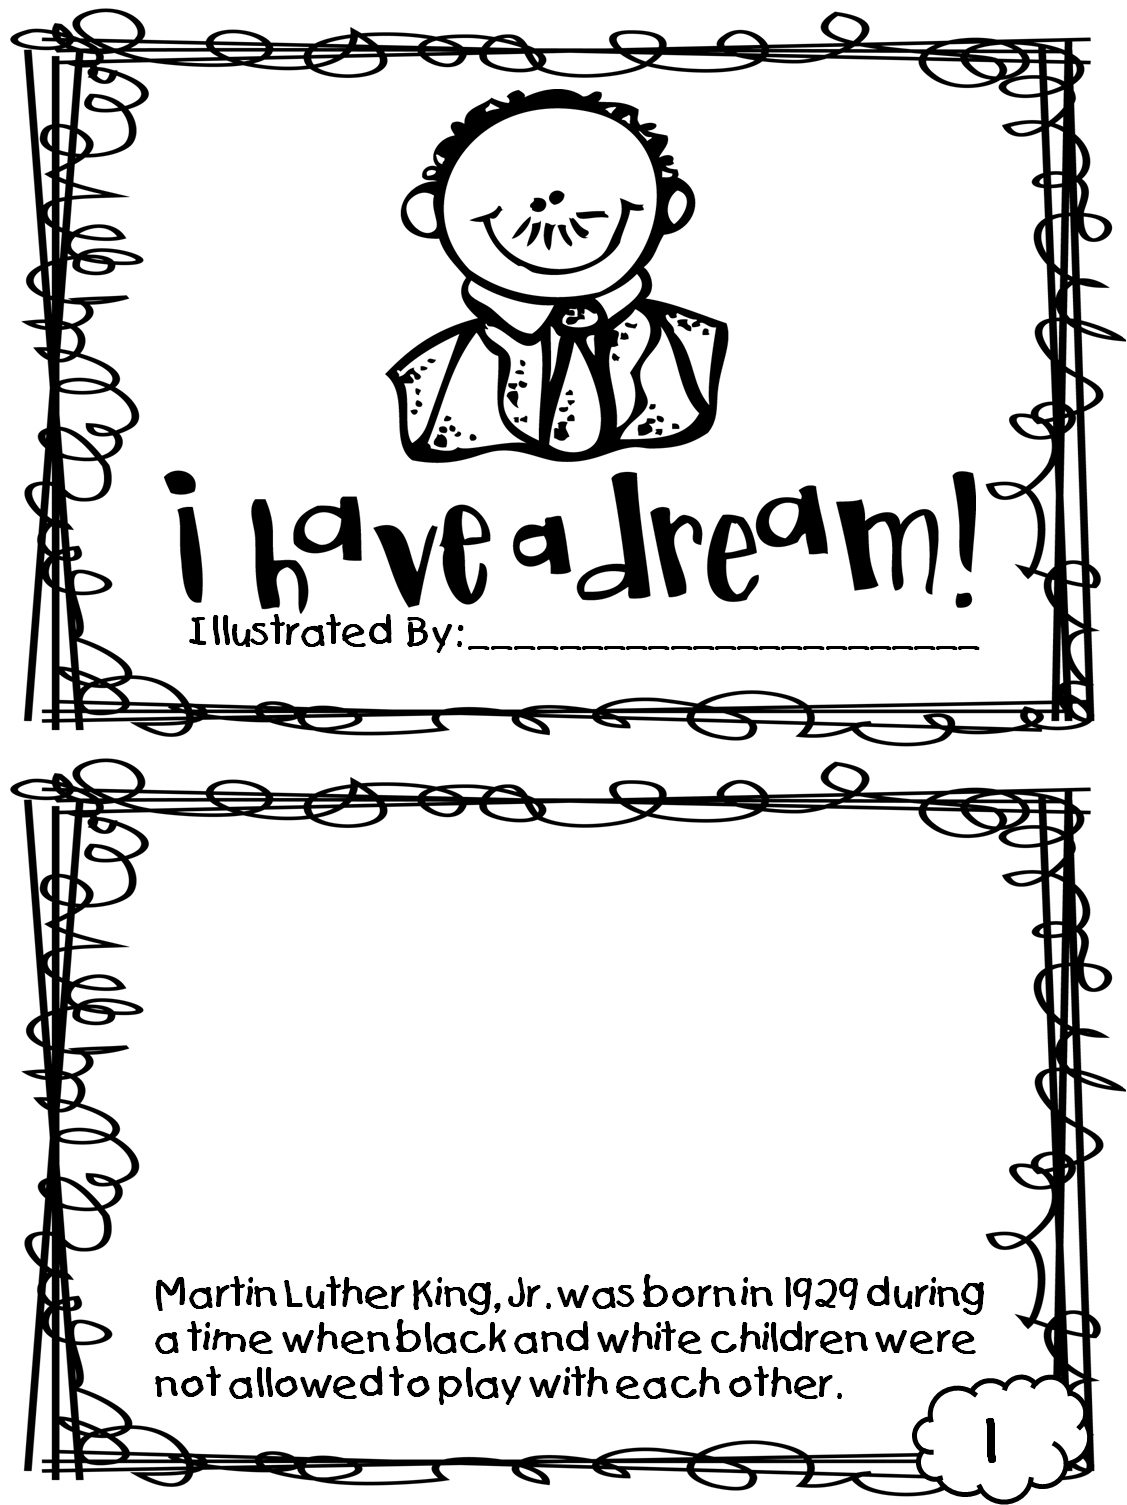 Coloring Pages ~ Fantastic Martin Luther King Jr Coloring Page - Martin Luther King Free Printable Coloring Pages